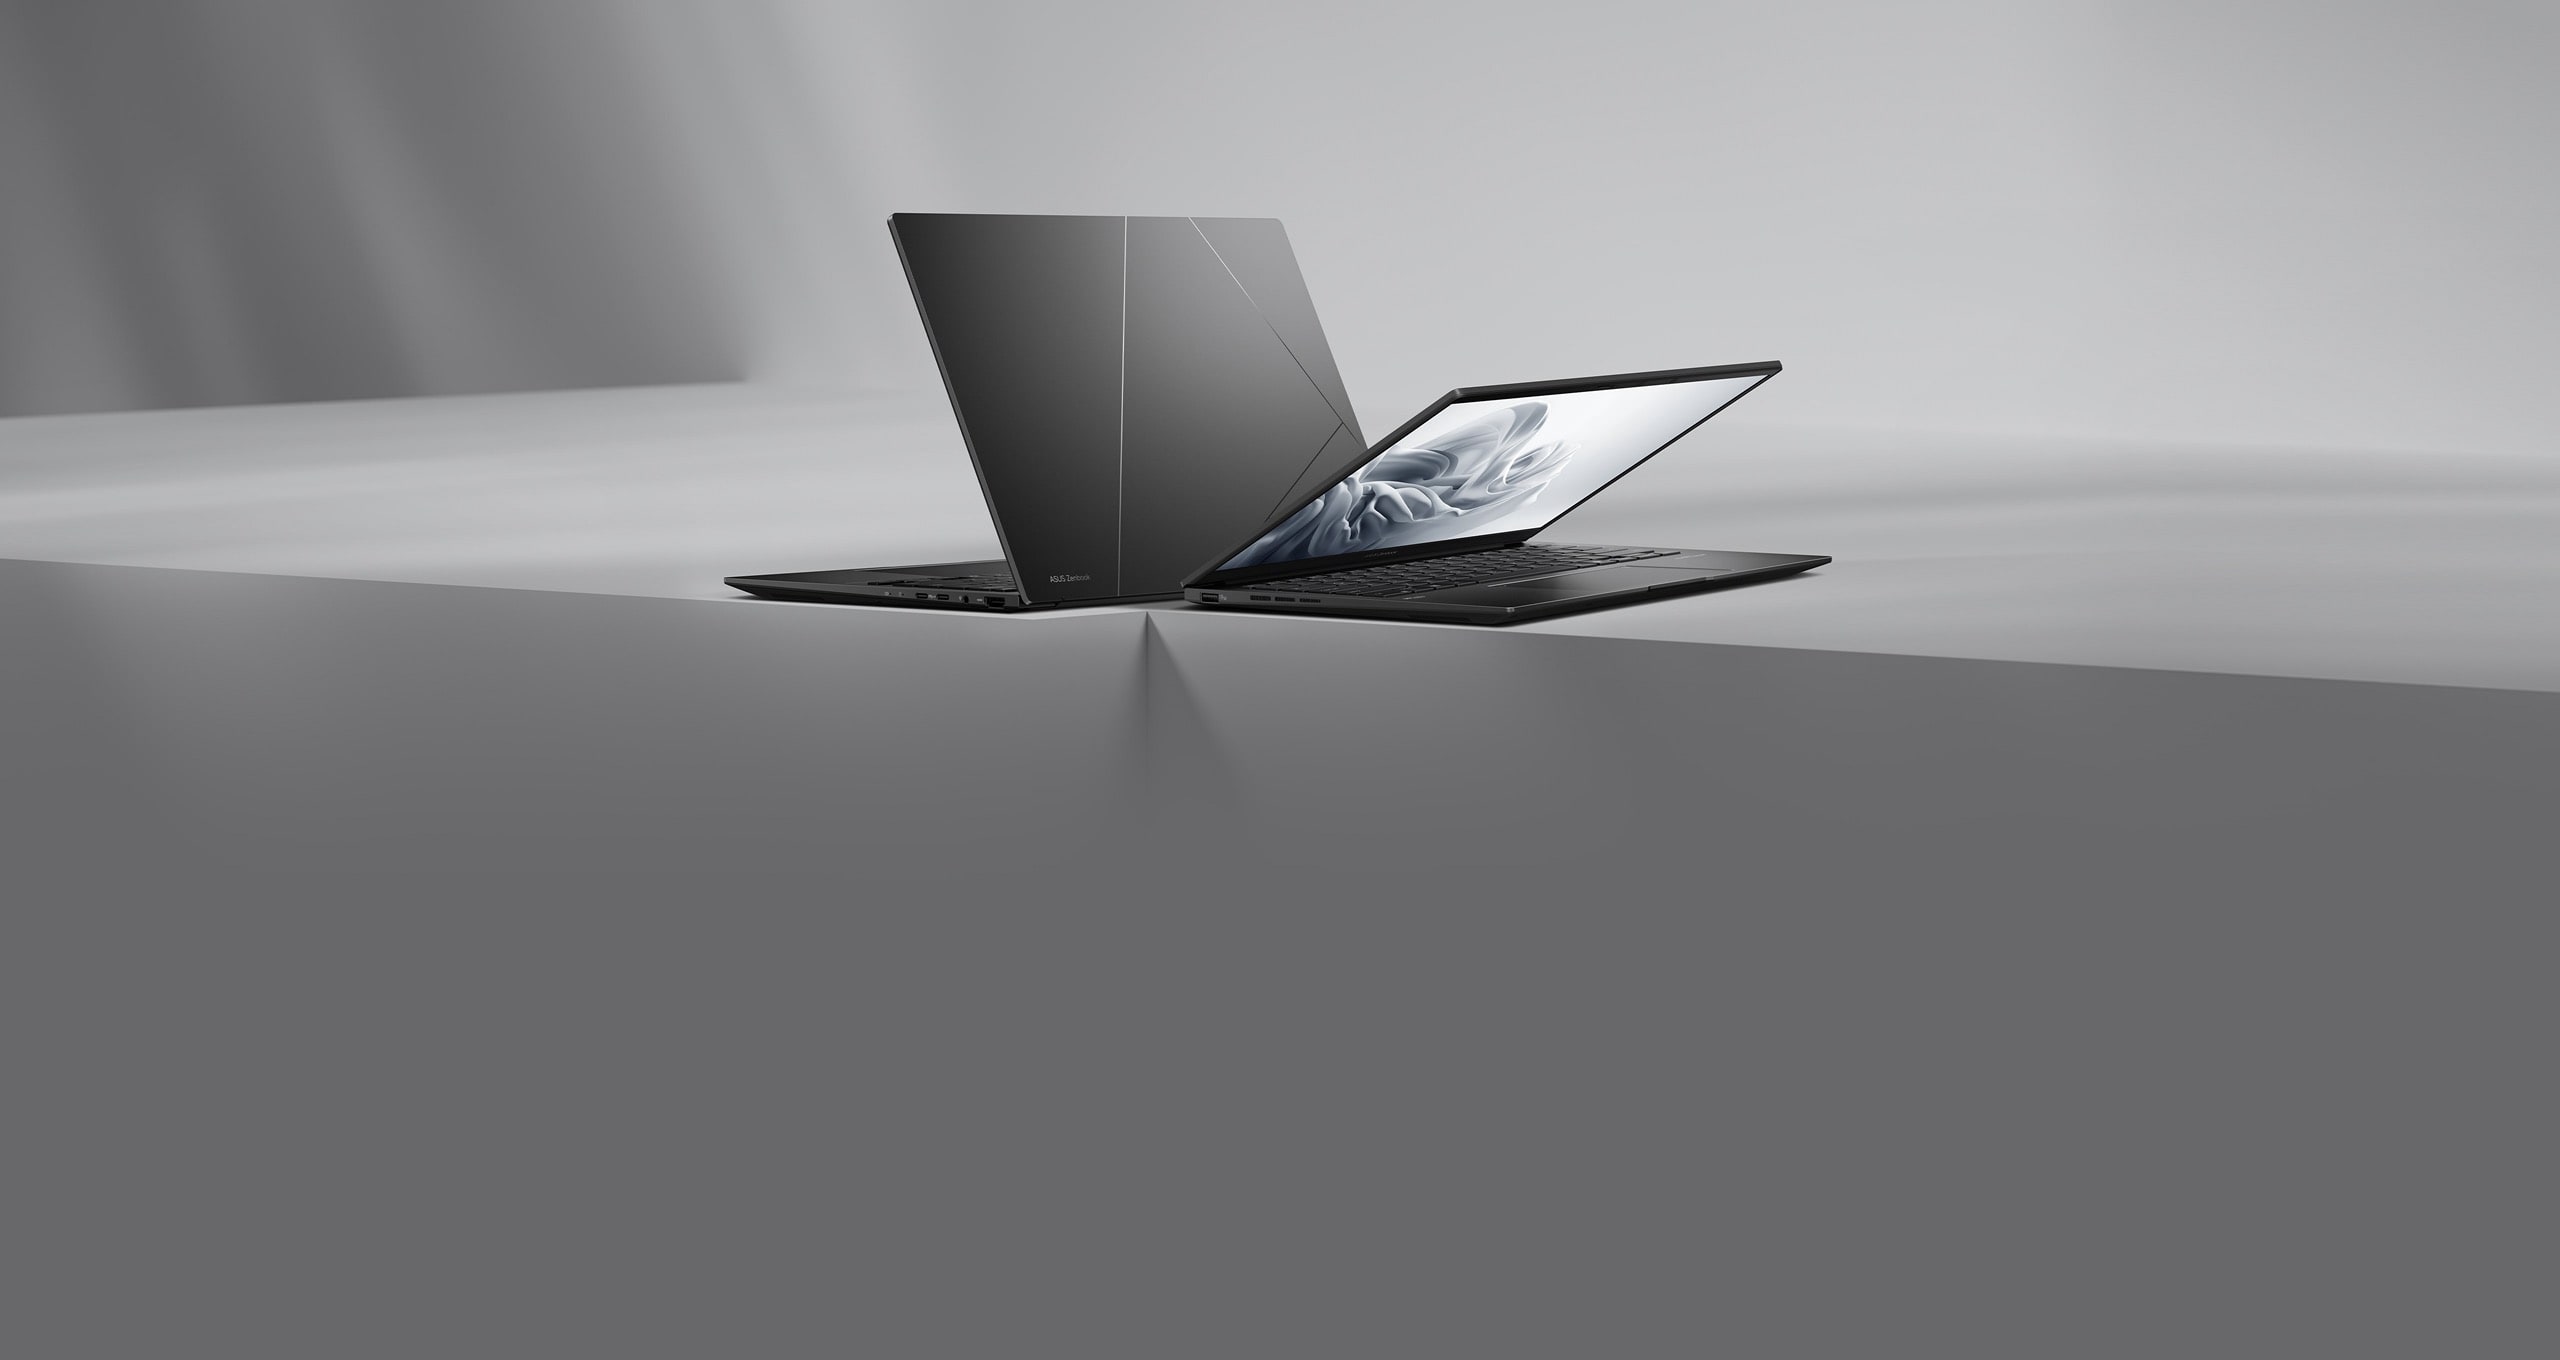 Two Jade black Zenbook 14 OLED placed back-to-back on a muted gray surface.